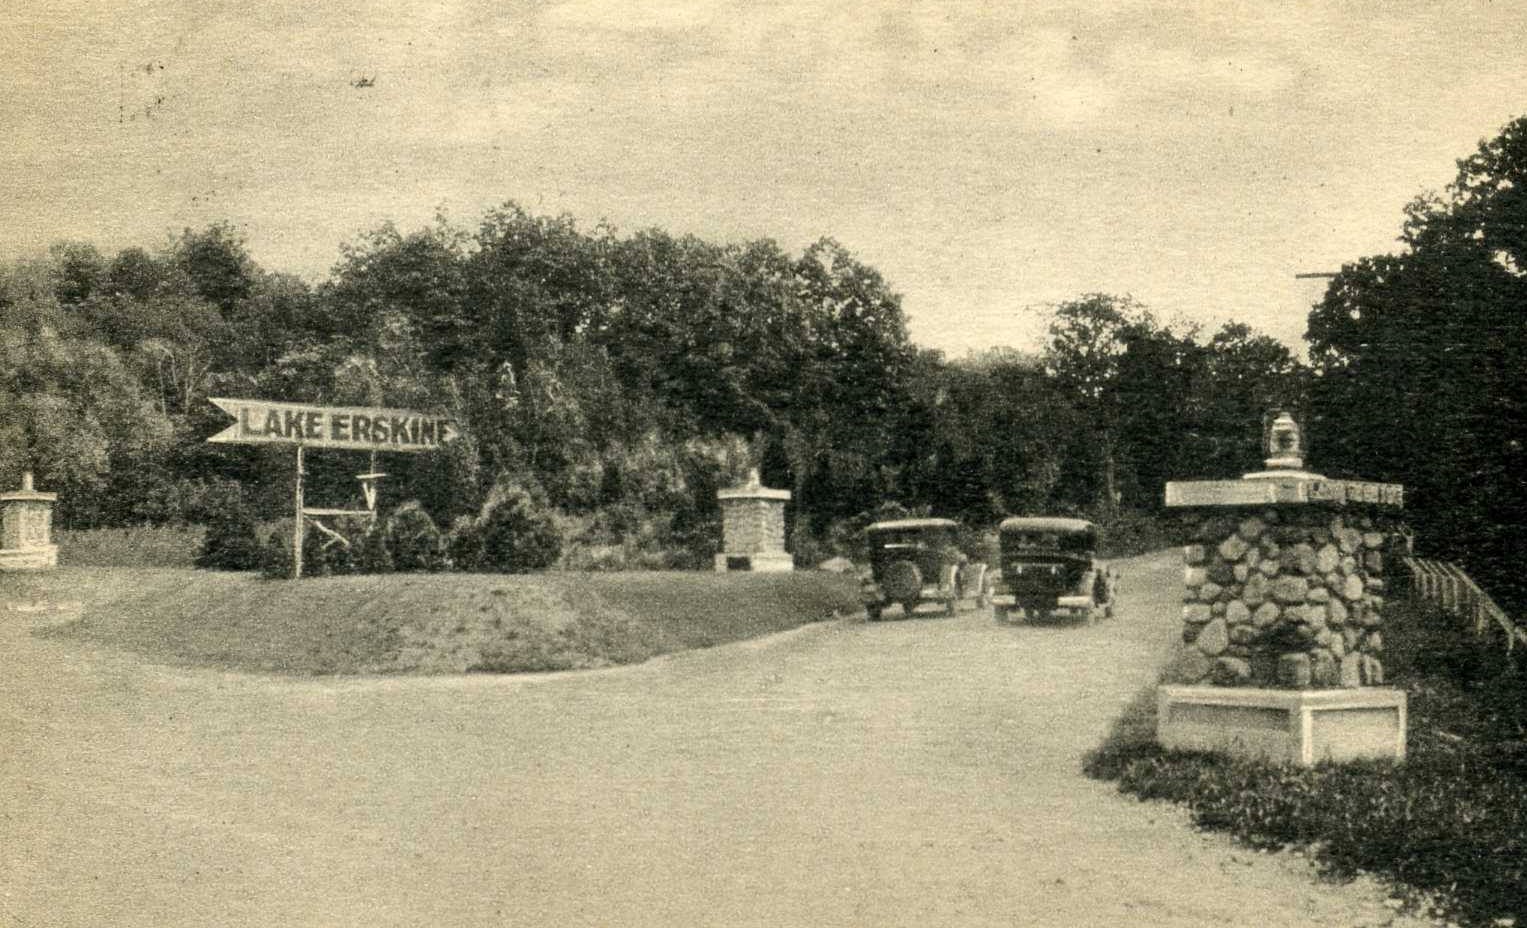 Horizontal black-and-white historical photograph of an intersection of two streets. The perspective is from the street in the foreground (moving across the image left to right) looking down the intersecting street. Two cars are stationed down the intersecting streets, and along the size of the road are, on the left, a wooden, arrow-shaped sign that reads Lake Erskine and on the left a stone pier with what appears to be a small lantern on top of it. The background of the photo is lined with trees and the sky above is partly cloudy.